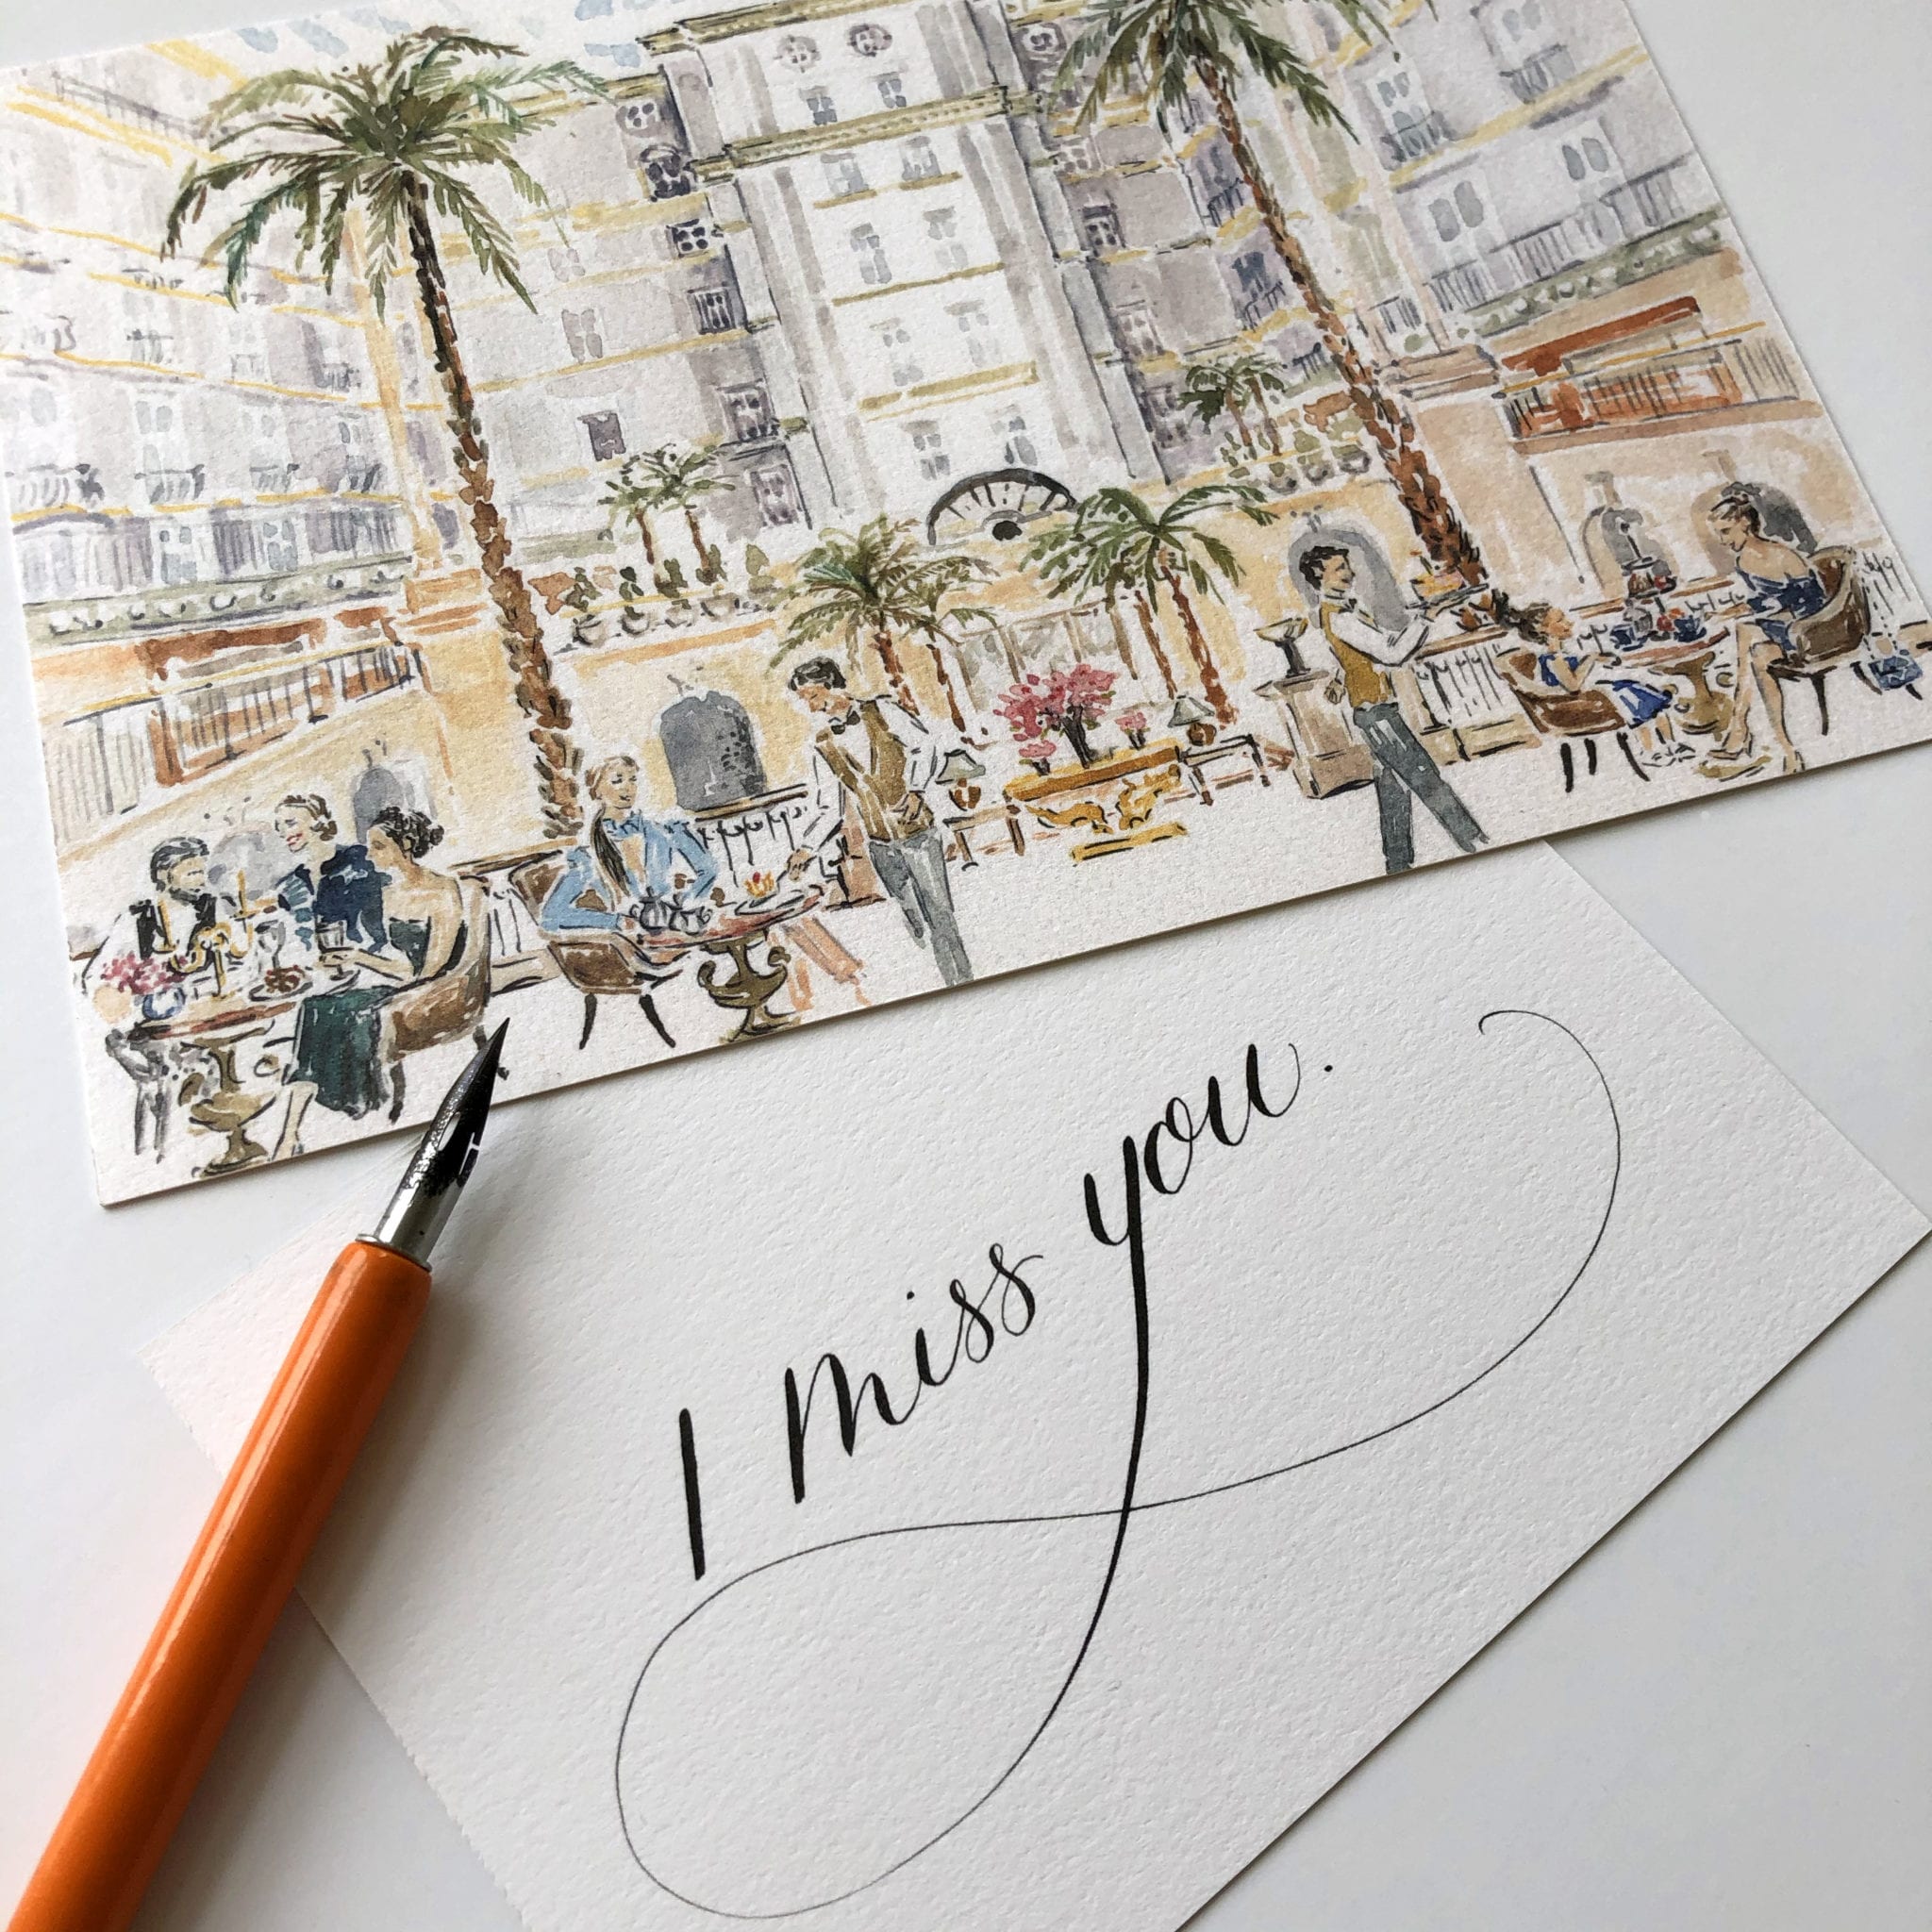 Stay Close, Even When Apart with London Calligraphy - The Landmark London  Hotel